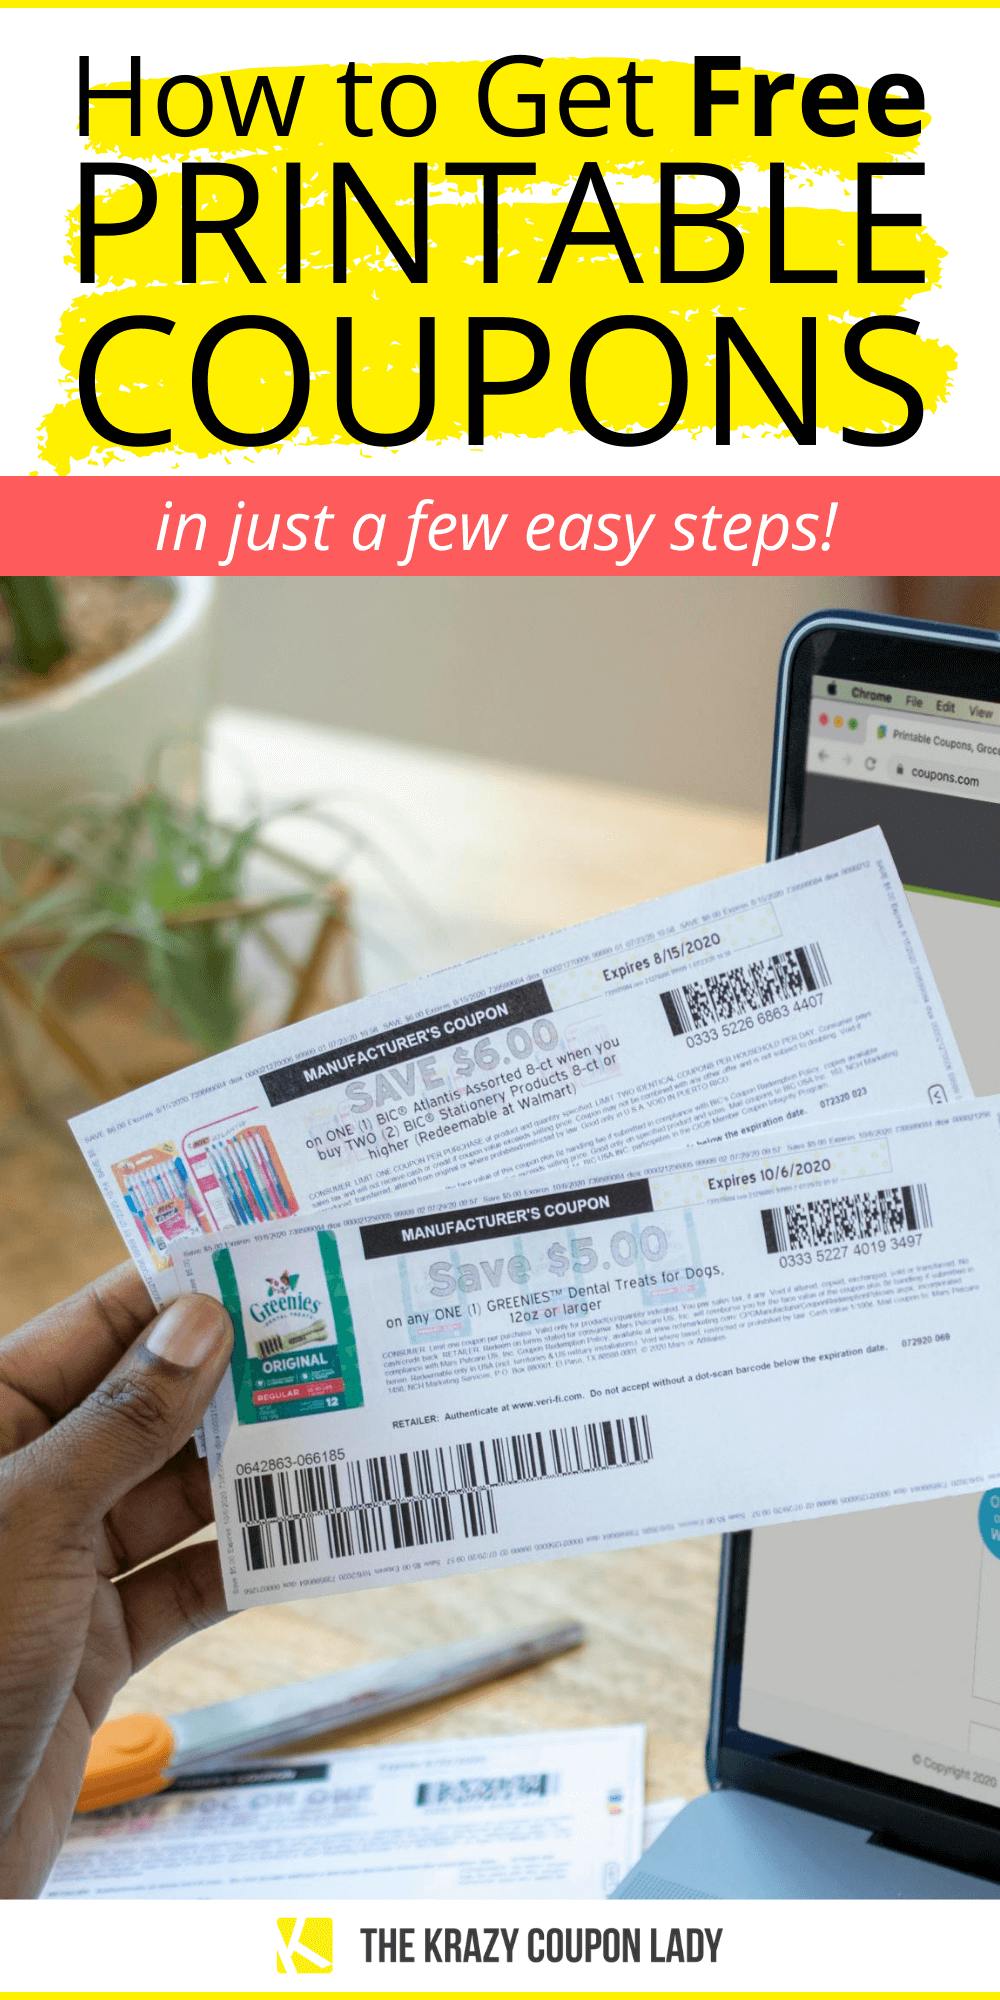 Get Free Printable Coupons in a Few Easy Steps The Krazy Coupon Lady